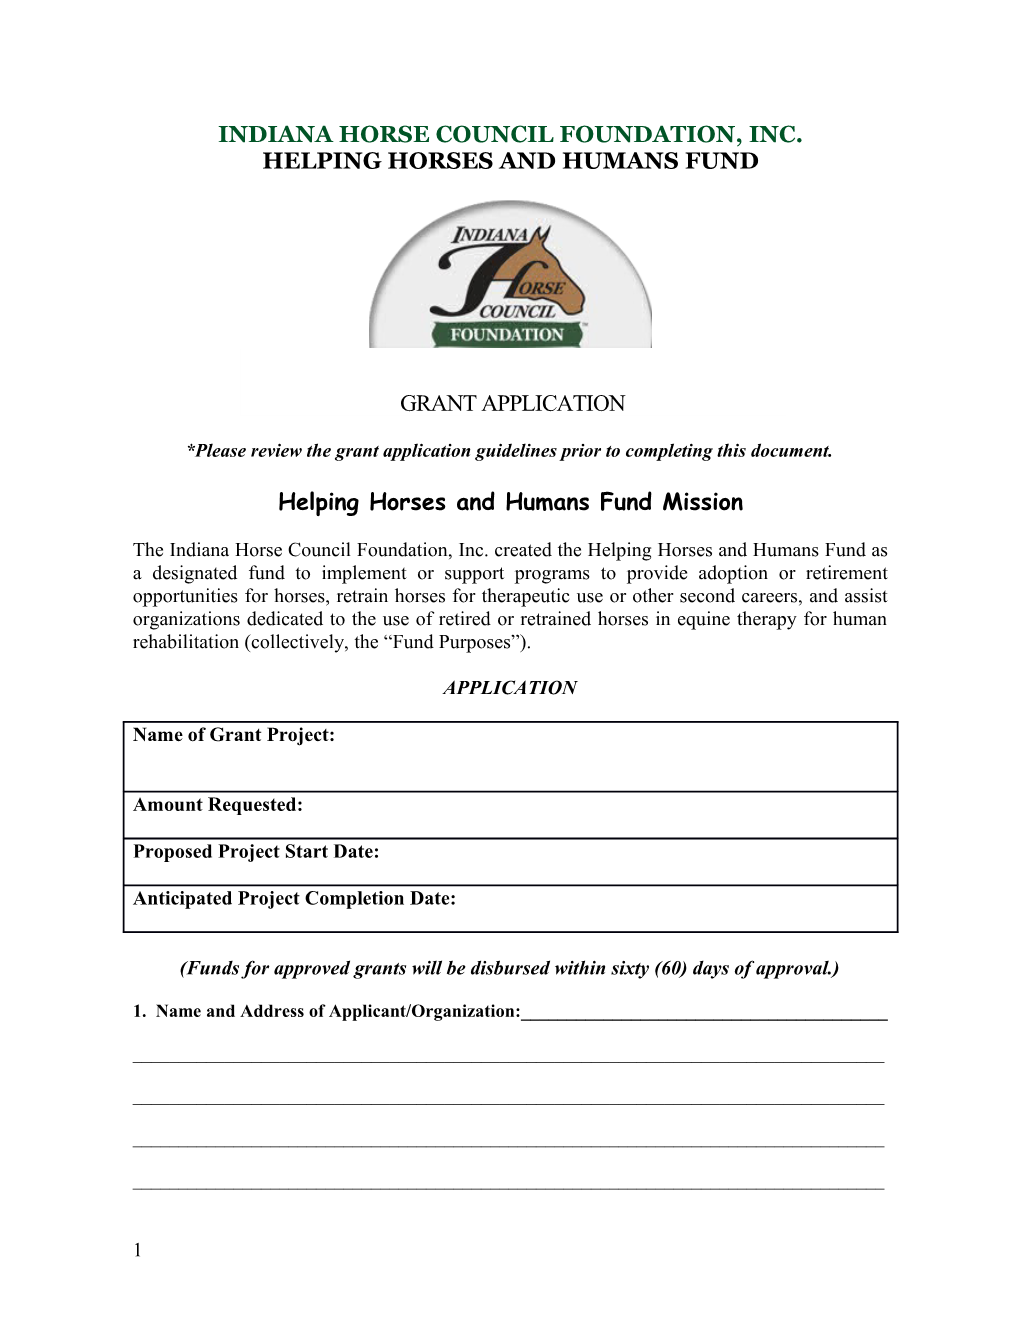 Indiana Standardbred Association Grant Request for 2010